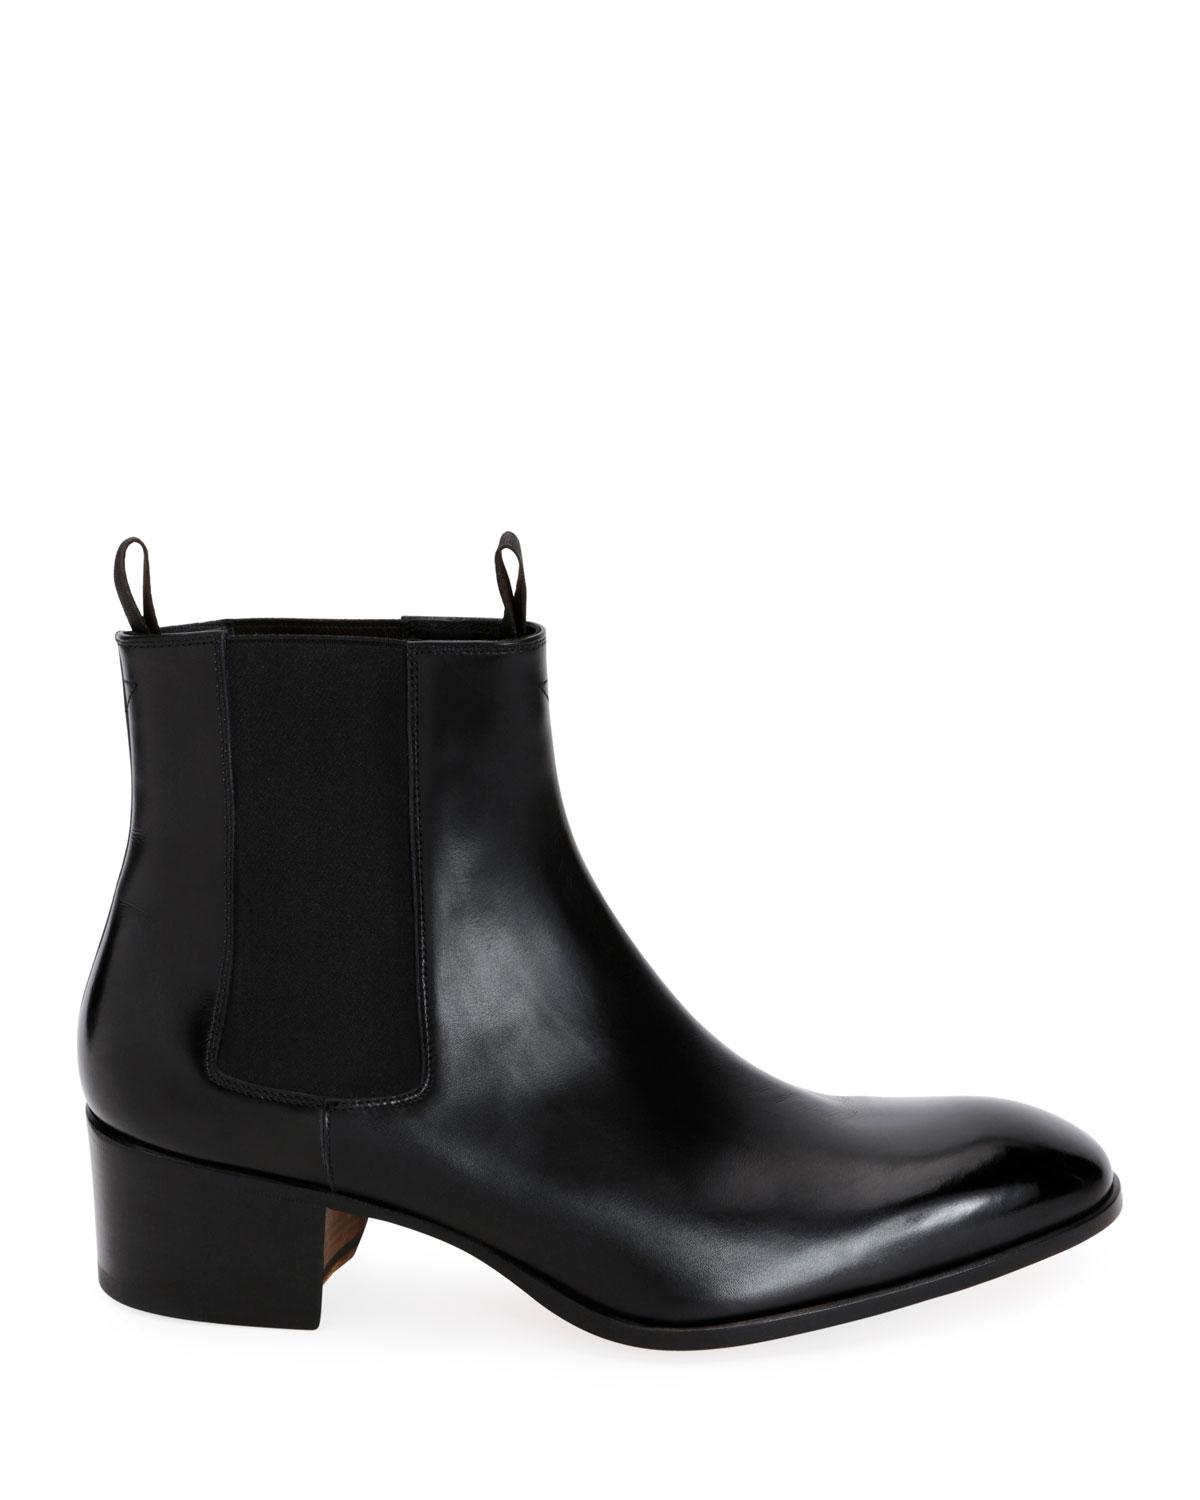 Tom Ford Leather Men's Wilde Patent Chelsea Boots in Black for Men - Lyst